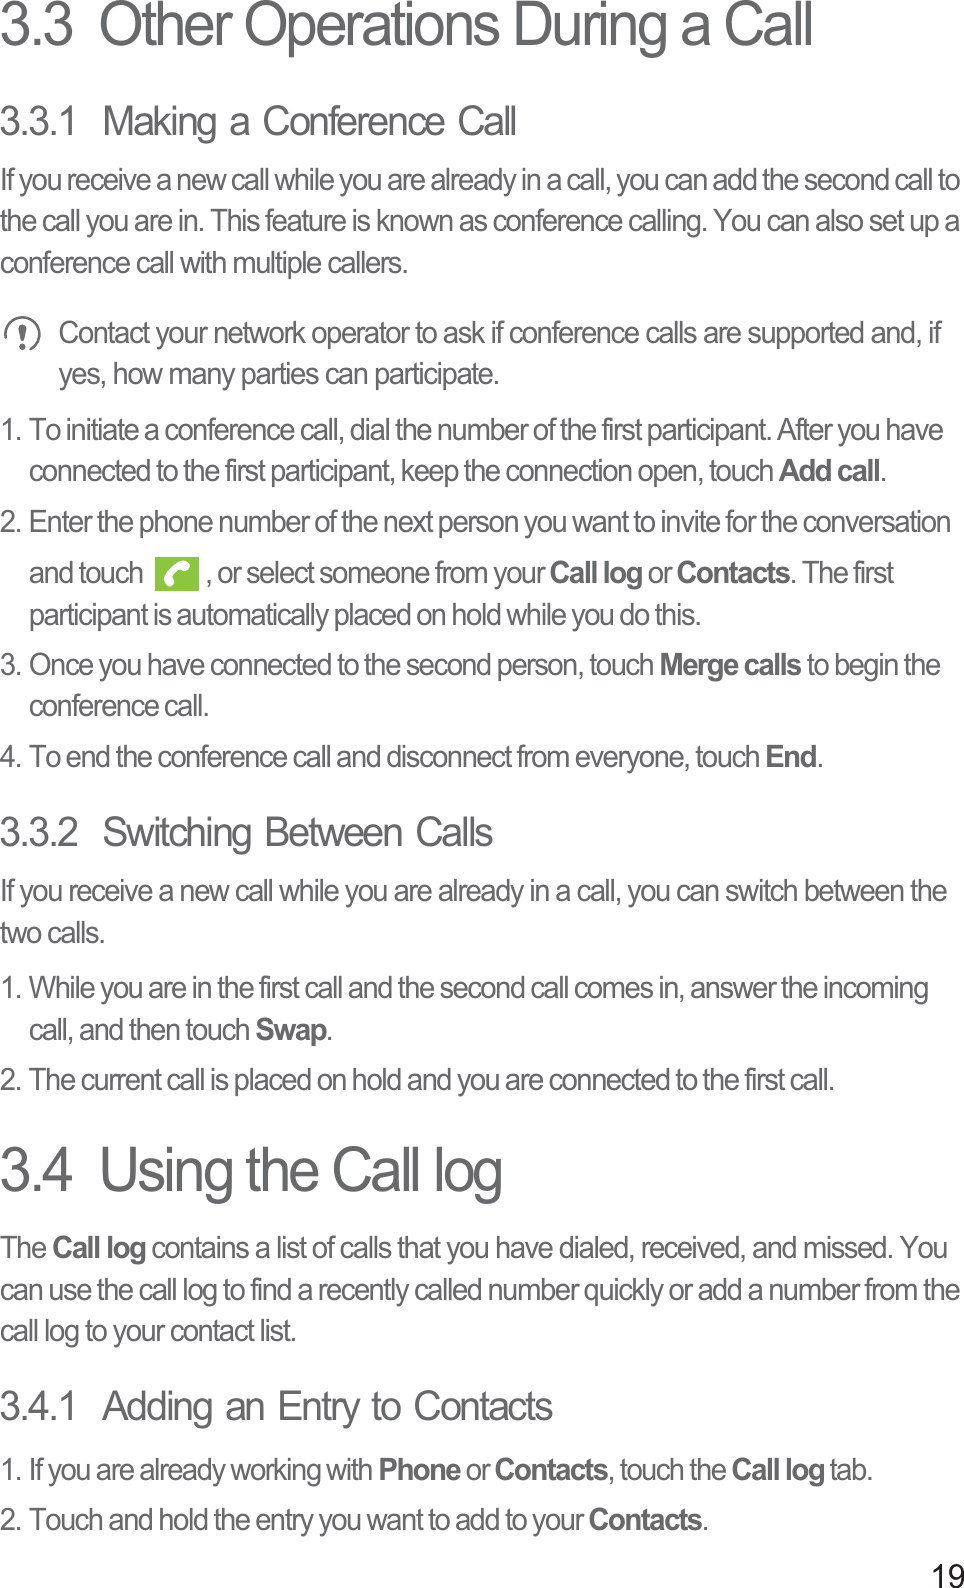 193.3  Other Operations During a Call3.3.1  Making a Conference CallIf you receive a new call while you are already in a call, you can add the second call to the call you are in. This feature is known as conference calling. You can also set up a conference call with multiple callers.Contact your network operator to ask if conference calls are supported and, if yes, how many parties can participate.1. To initiate a conference call, dial the number of the first participant. After you have connected to the first participant, keep the connection open, touch Add call.2. Enter the phone number of the next person you want to invite for the conversation and touch  , or select someone from your Call log or Contacts. The first participant is automatically placed on hold while you do this.3. Once you have connected to the second person, touch Merge calls to begin the conference call.4. To end the conference call and disconnect from everyone, touch End.3.3.2  Switching Between CallsIf you receive a new call while you are already in a call, you can switch between the two calls.1. While you are in the first call and the second call comes in, answer the incoming call, and then touch Swap.2. The current call is placed on hold and you are connected to the first call.3.4  Using the Call logTheCall log contains a list of calls that you have dialed, received, and missed. You can use the call log to find a recently called number quickly or add a number from the call log to your contact list.3.4.1  Adding an Entry to Contacts1. If you are already working with Phone or Contacts, touch the Call log tab.2. Touch and hold the entry you want to add to your Contacts.